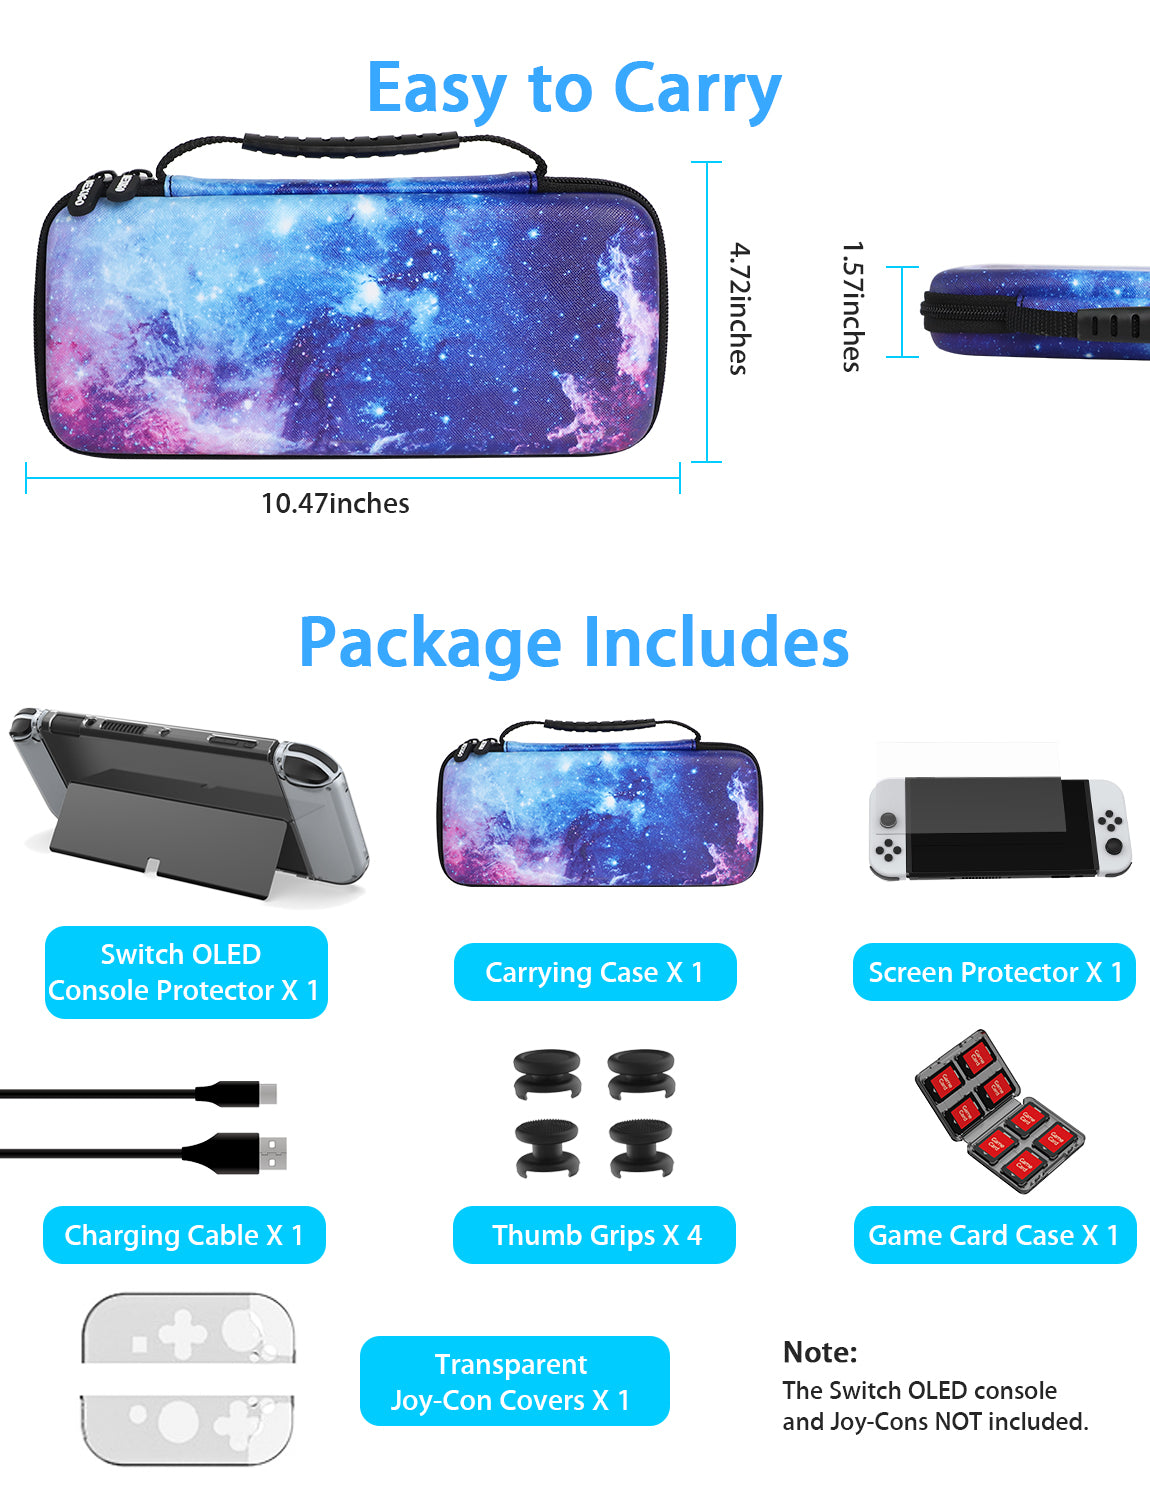 Package includes Carrying Case, Screen Protector,Joystick Caps,Protective Case, Joy-Con Cover Cable